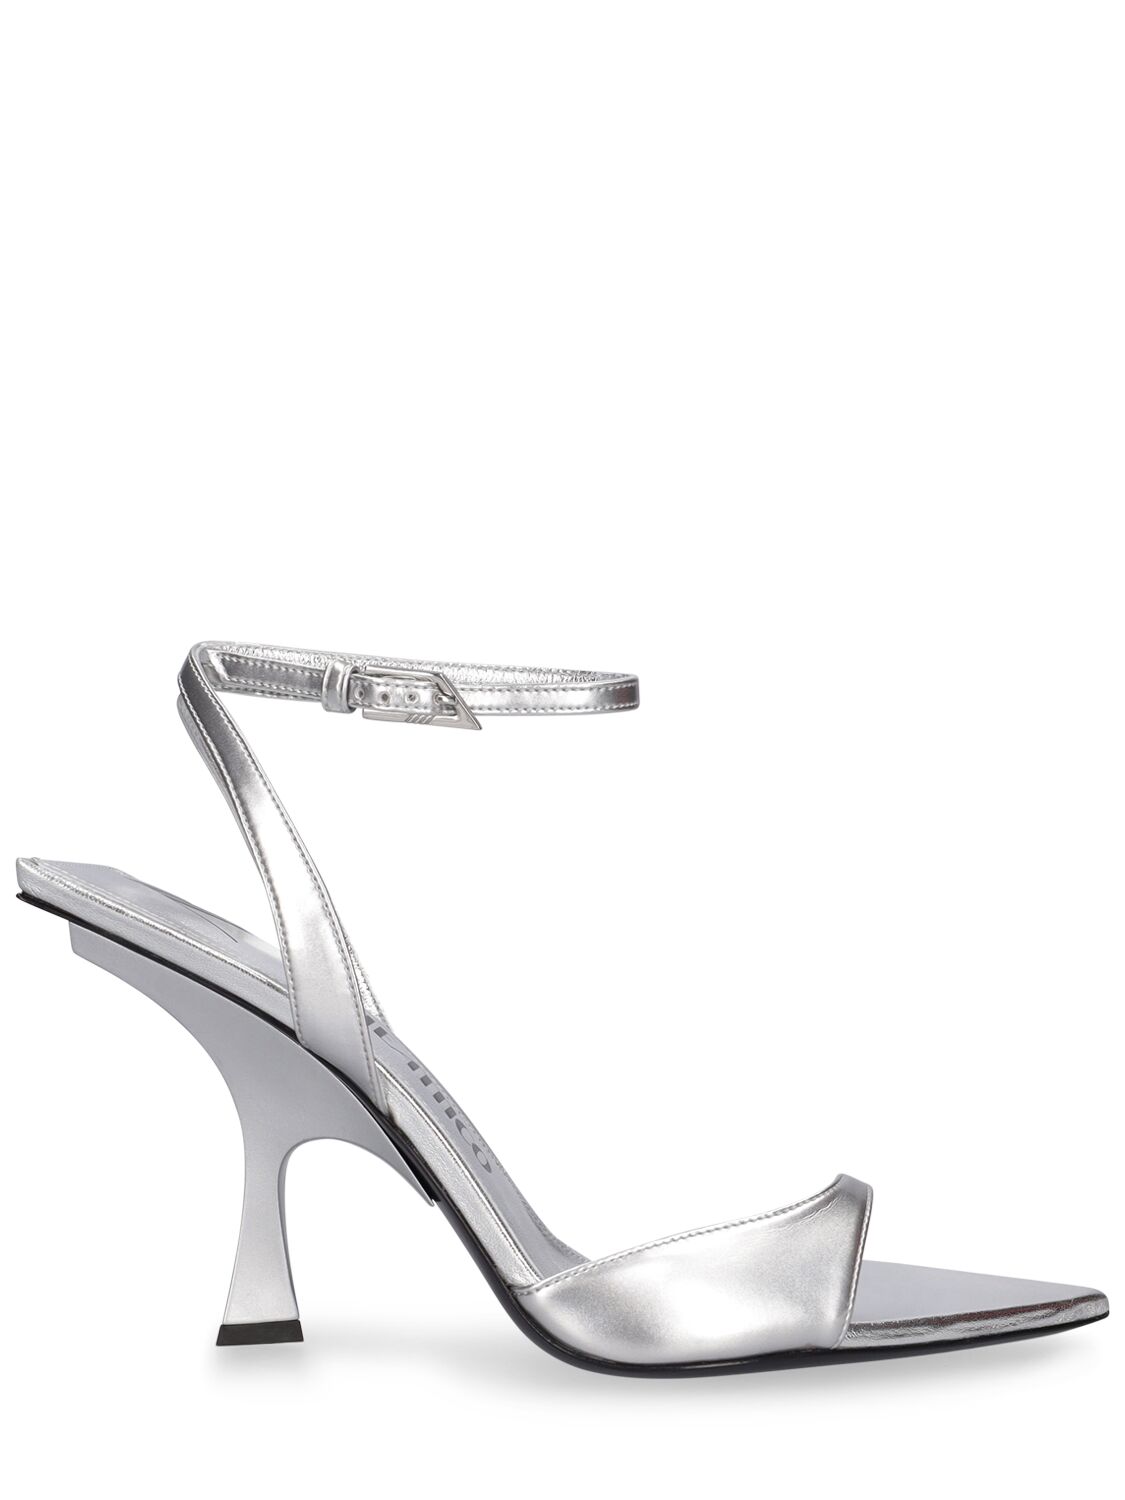 Attico 95mm Gg Faux Leather Mismatched Sandals In Silver